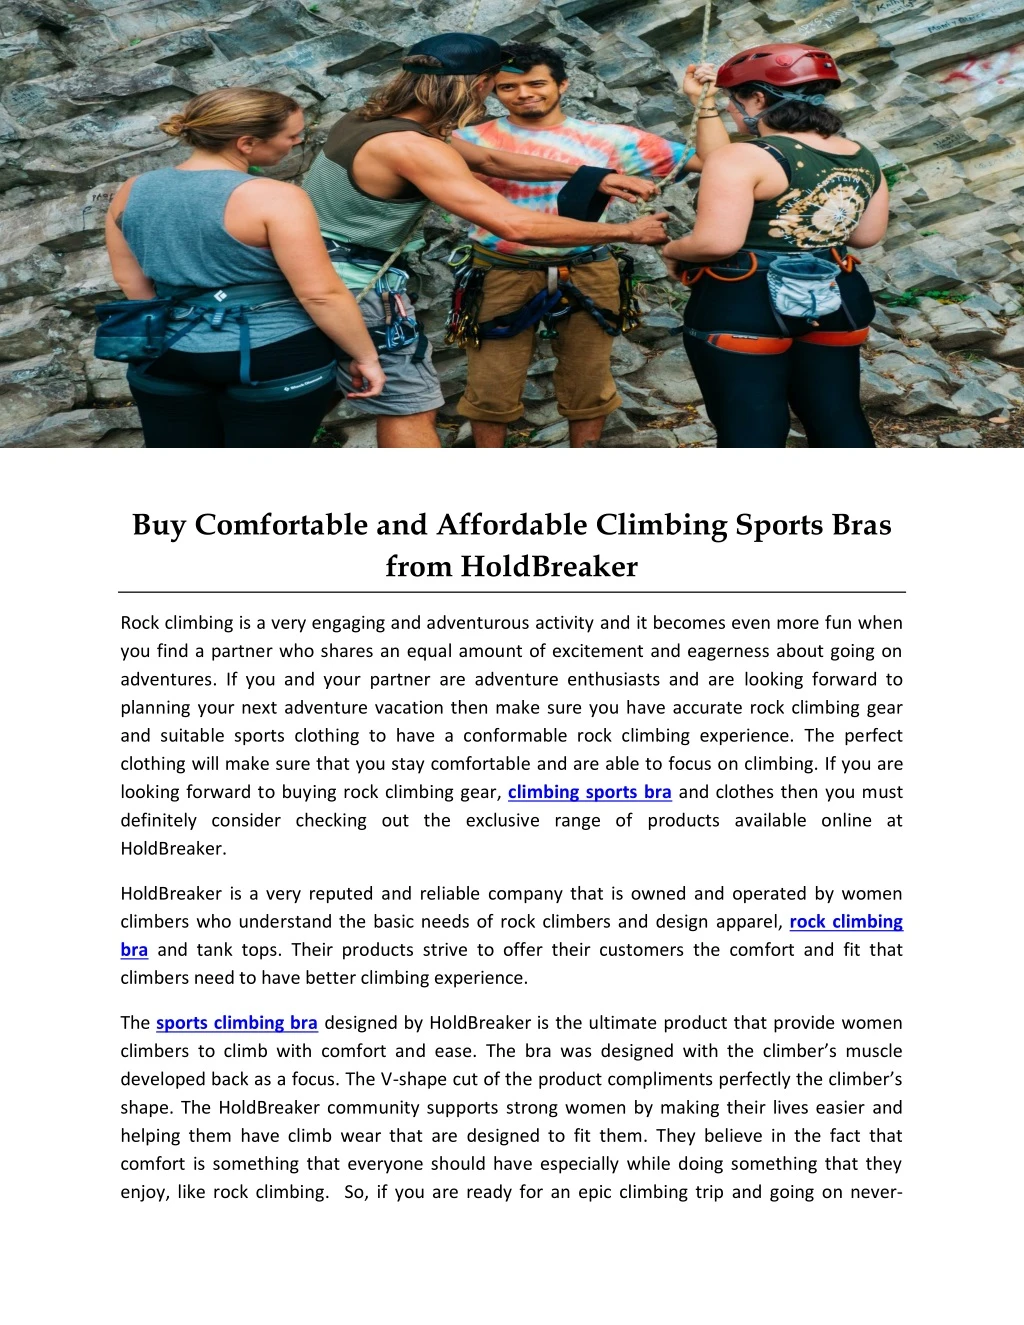 buy comfortable and affordable climbing sports